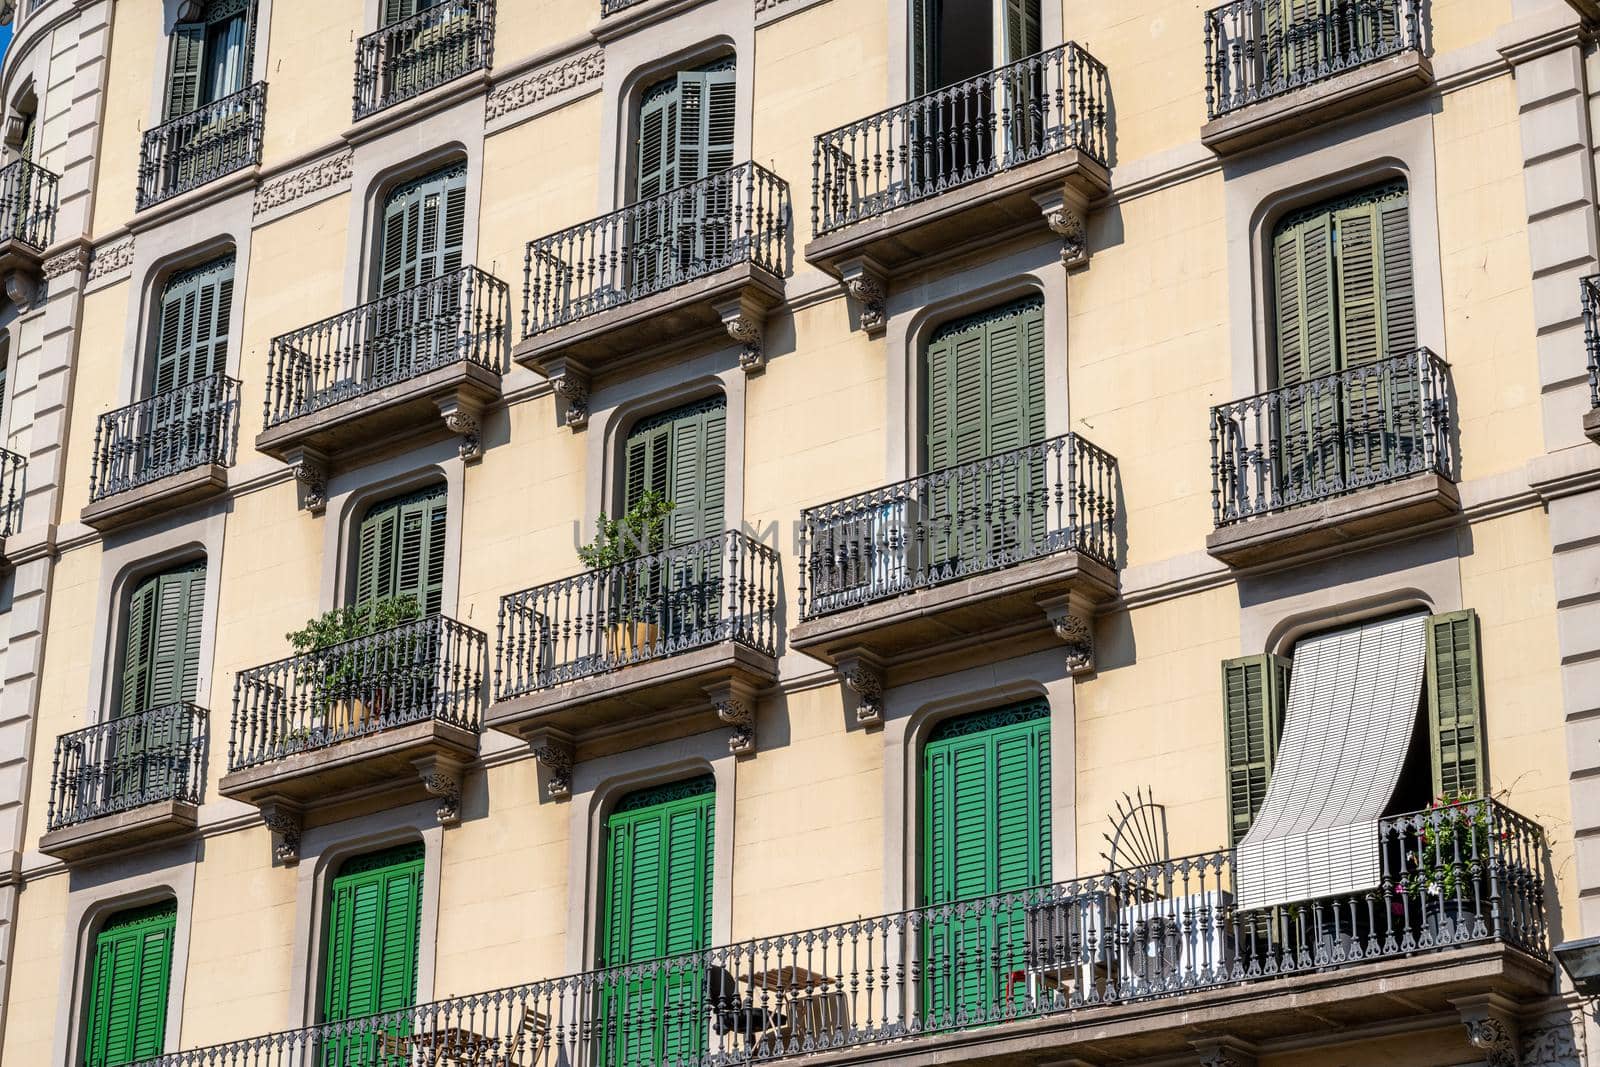 Typical house facade of an apartment building in Barcelona, Spain